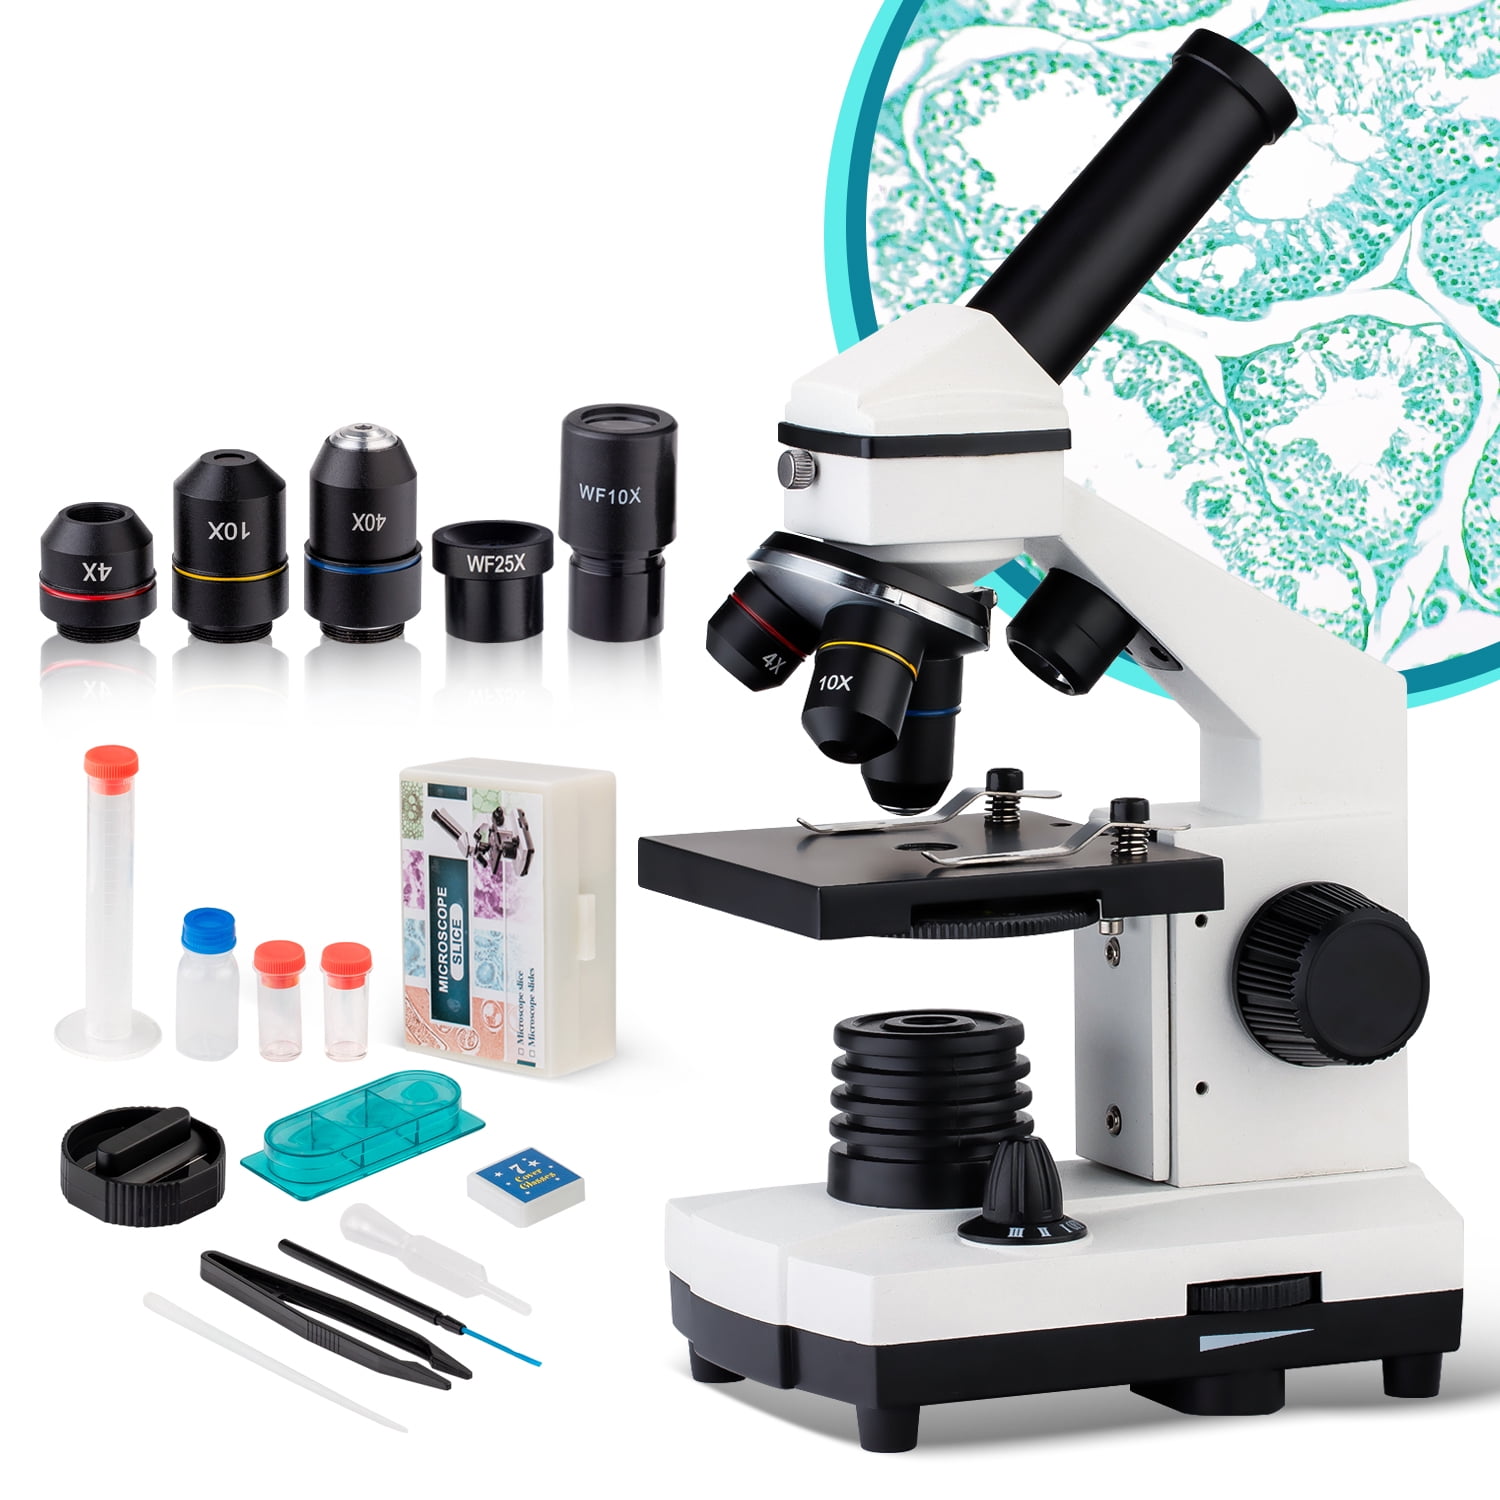 Battery Powered,Double Observation of The Specimen 10X/20X 4X,10X,40X Middle Biological Stereo Microscope 40x-800x,can be Connected to a Mobile Phone,Eyepiece Optical Glass Objective Lens 